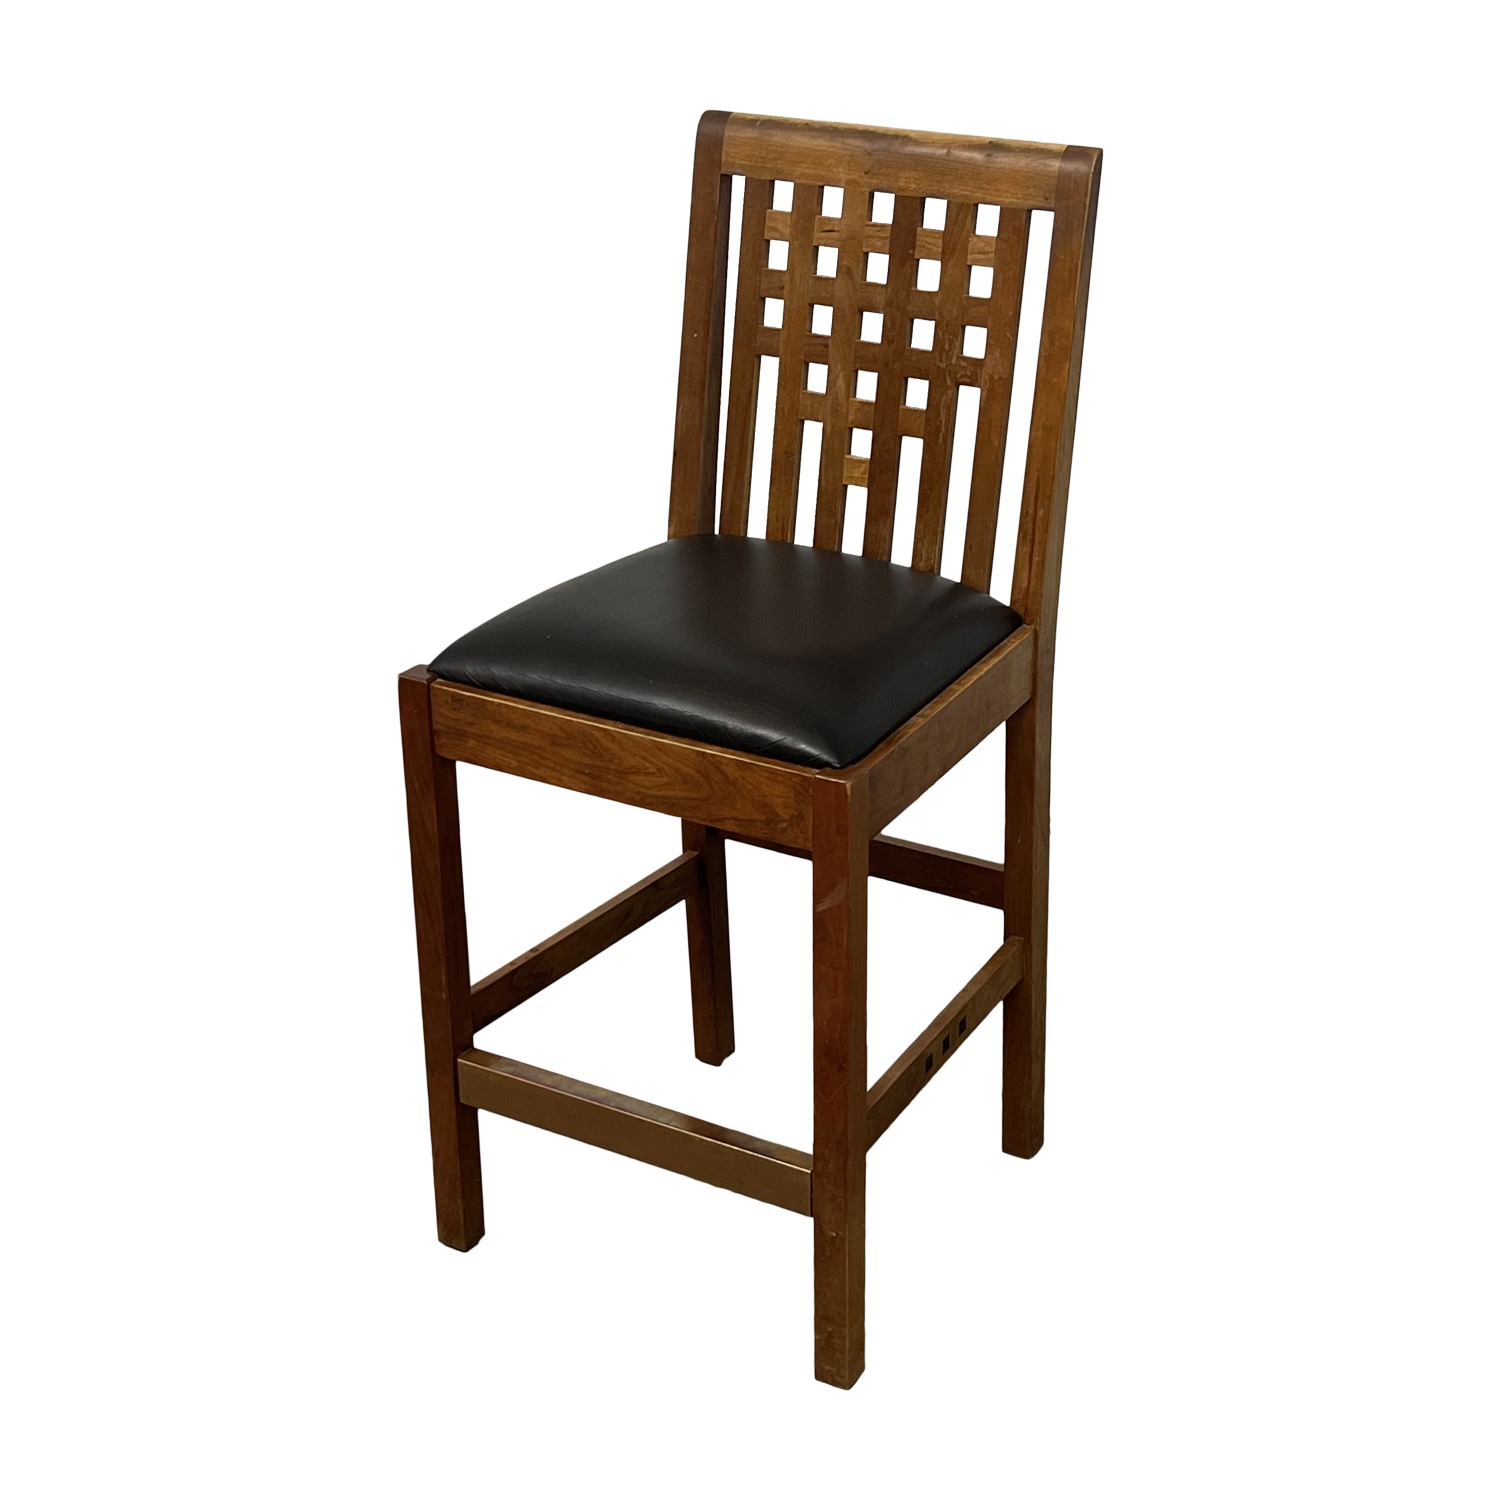 Stickley Furniture Stickley Furniture Metropolitan Collection Counter Stools  Stools